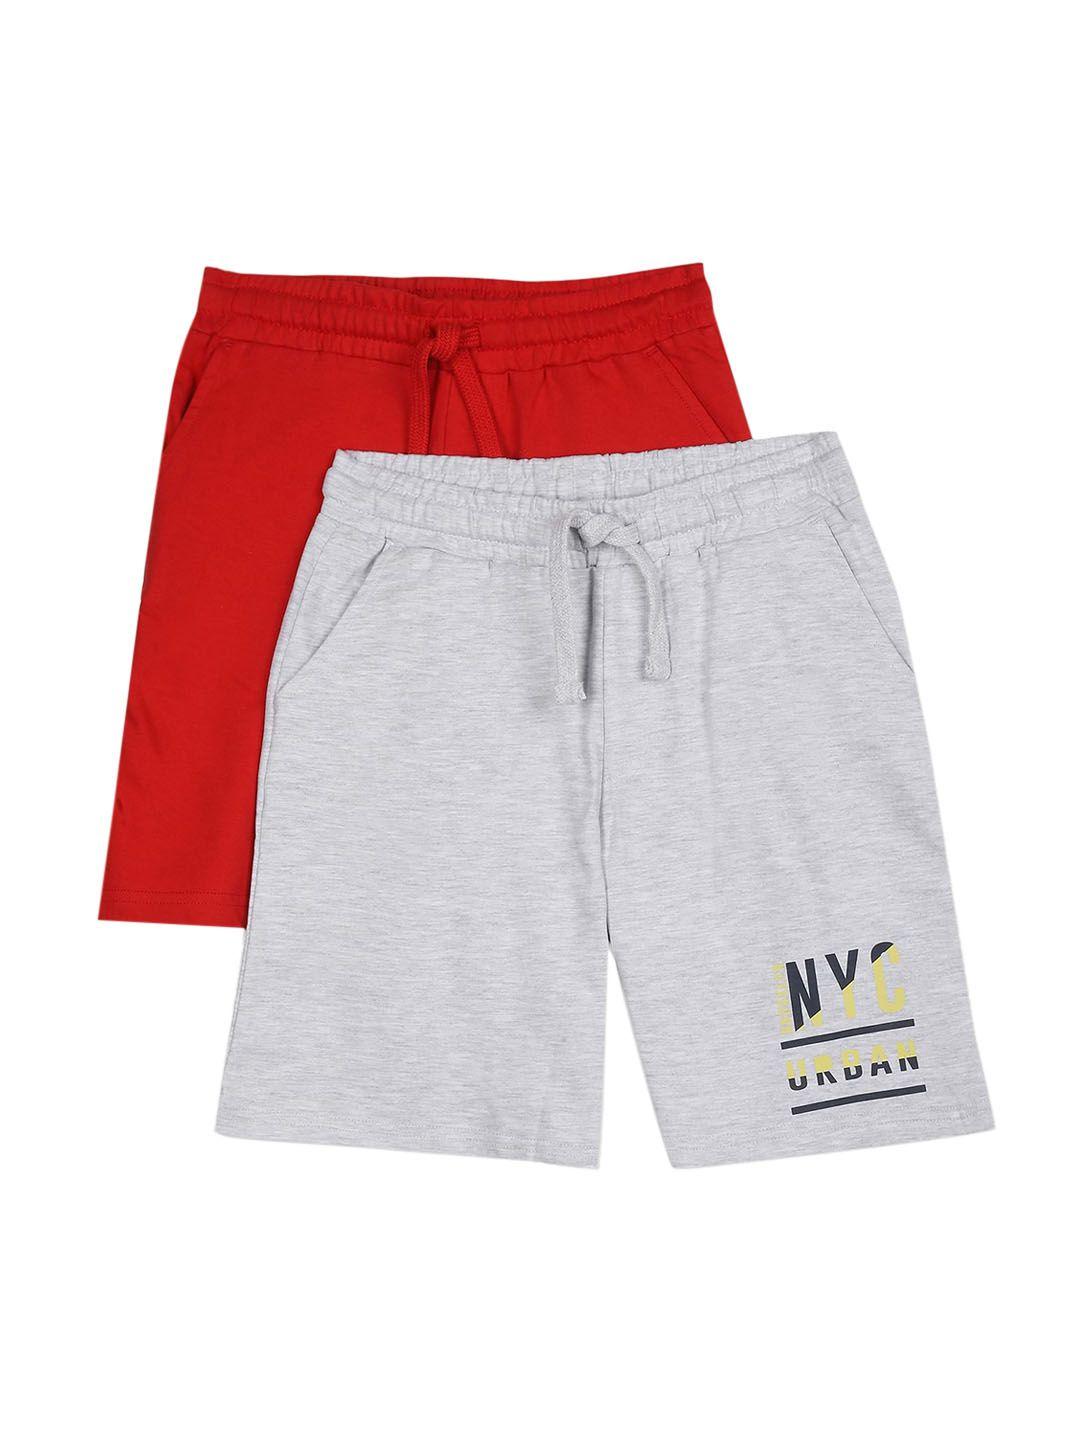 ruggers junior boys pack of 2 assorted mid-rise pure cotton shorts